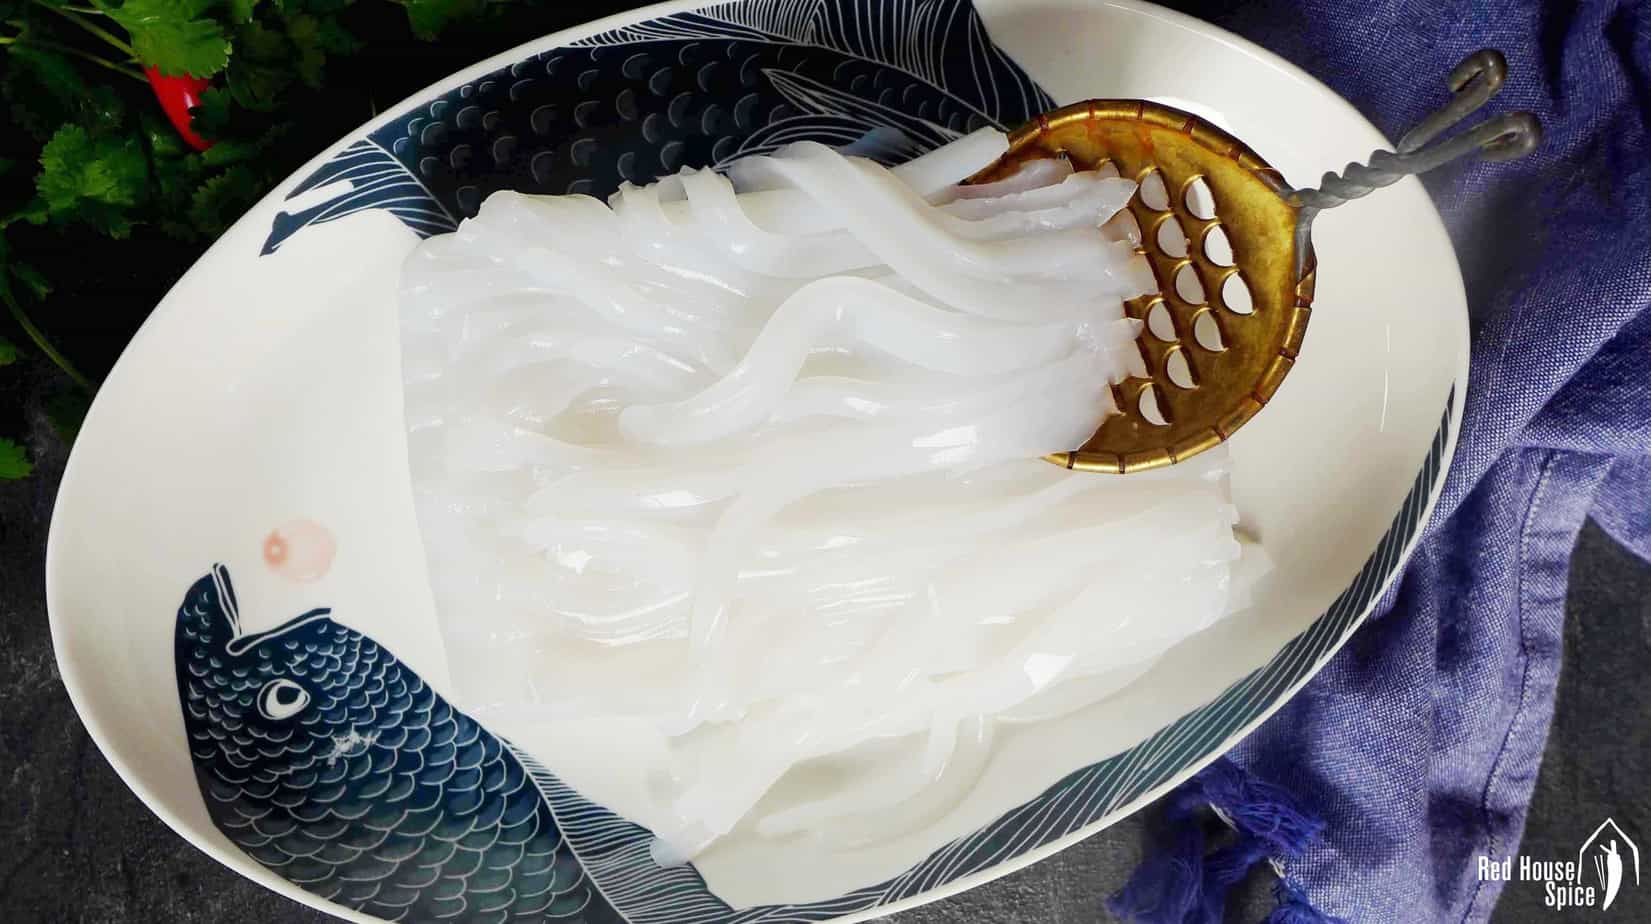 Use a special slicer to make noodle like stripes from a block of Mung bean jelly (Liangfen).